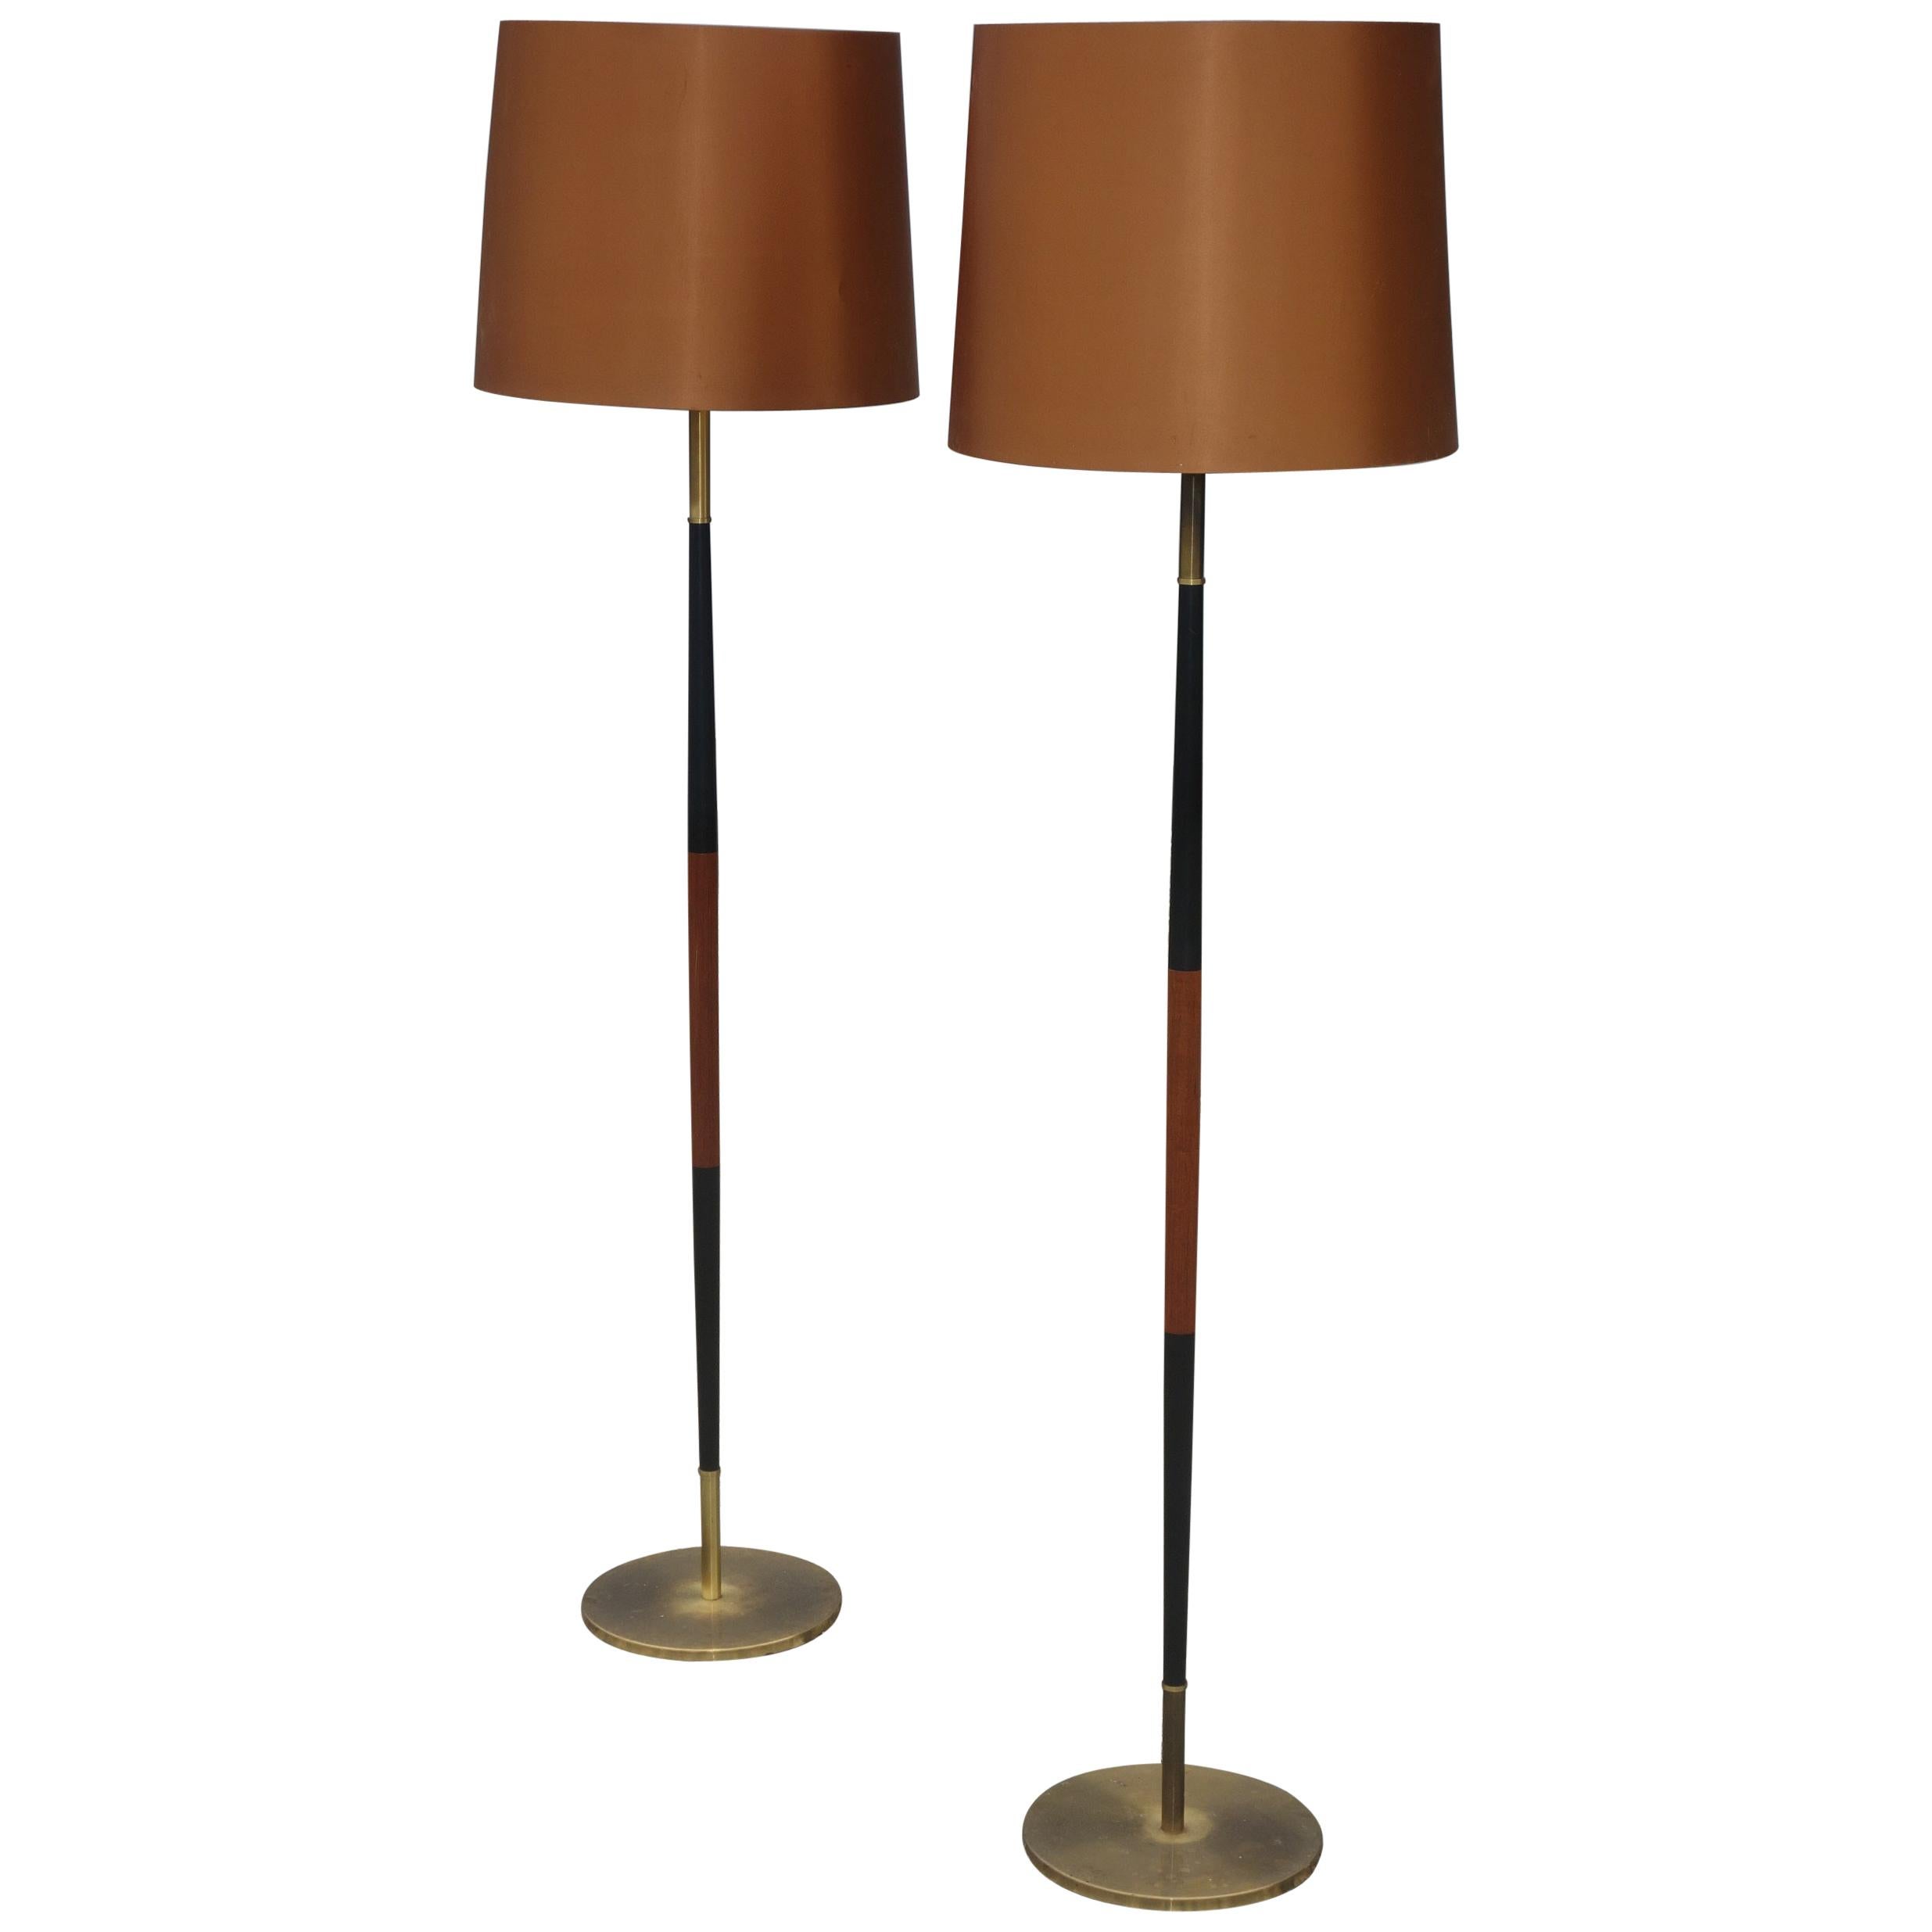 Danish Design a Pair of Floor Lamps, Brass, Teak and Black Lacquered Metal 1960 For Sale